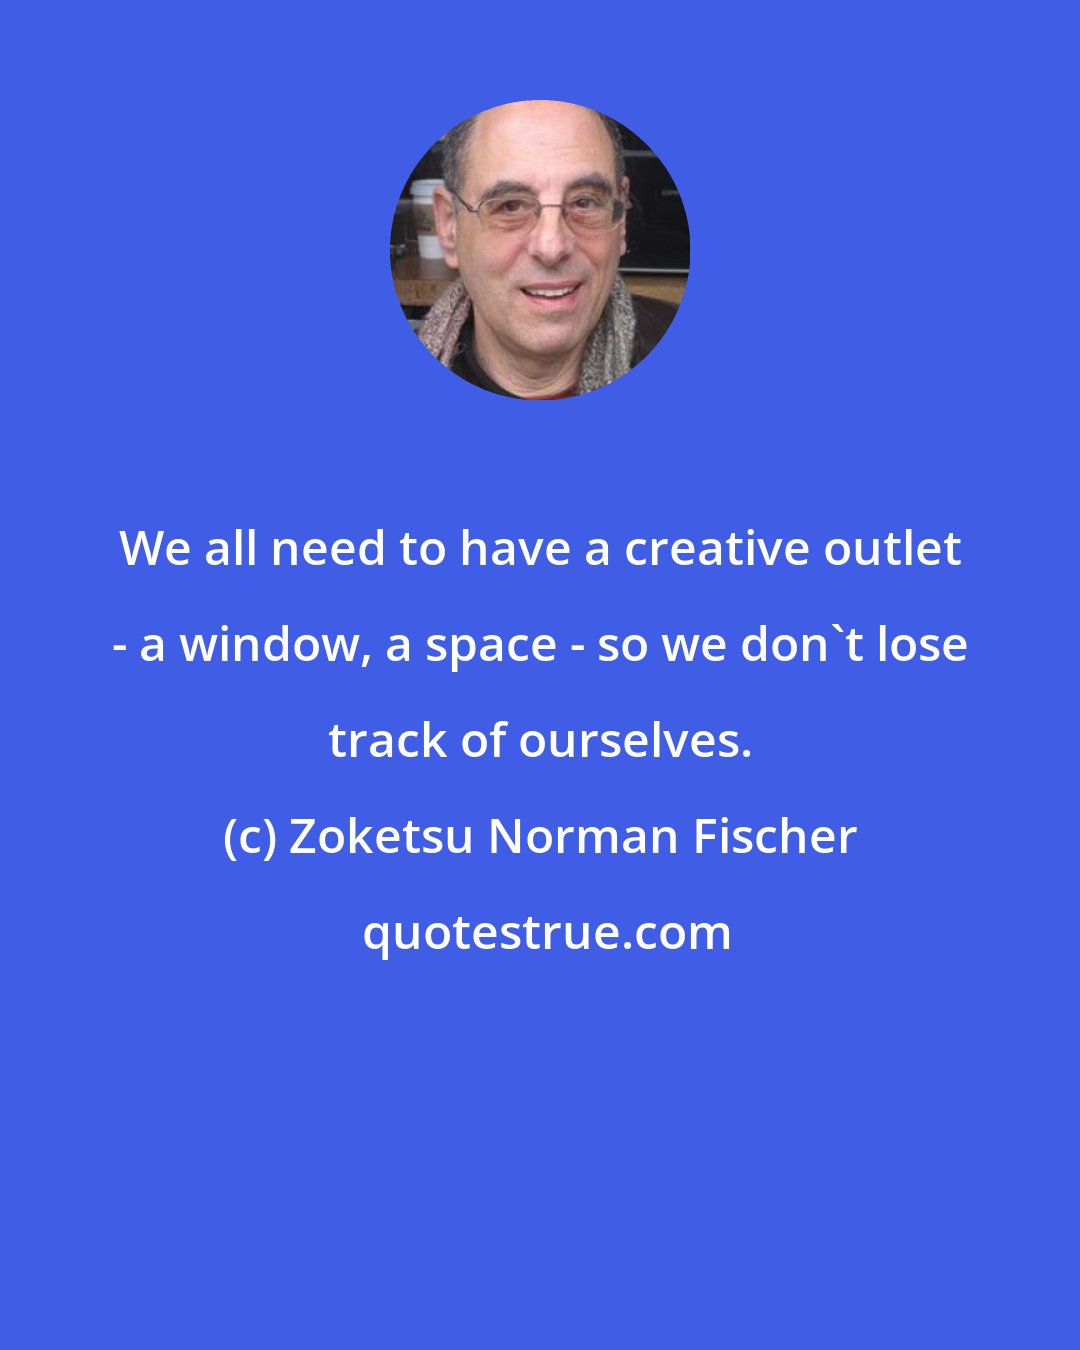 Zoketsu Norman Fischer: We all need to have a creative outlet - a window, a space - so we don't lose track of ourselves.